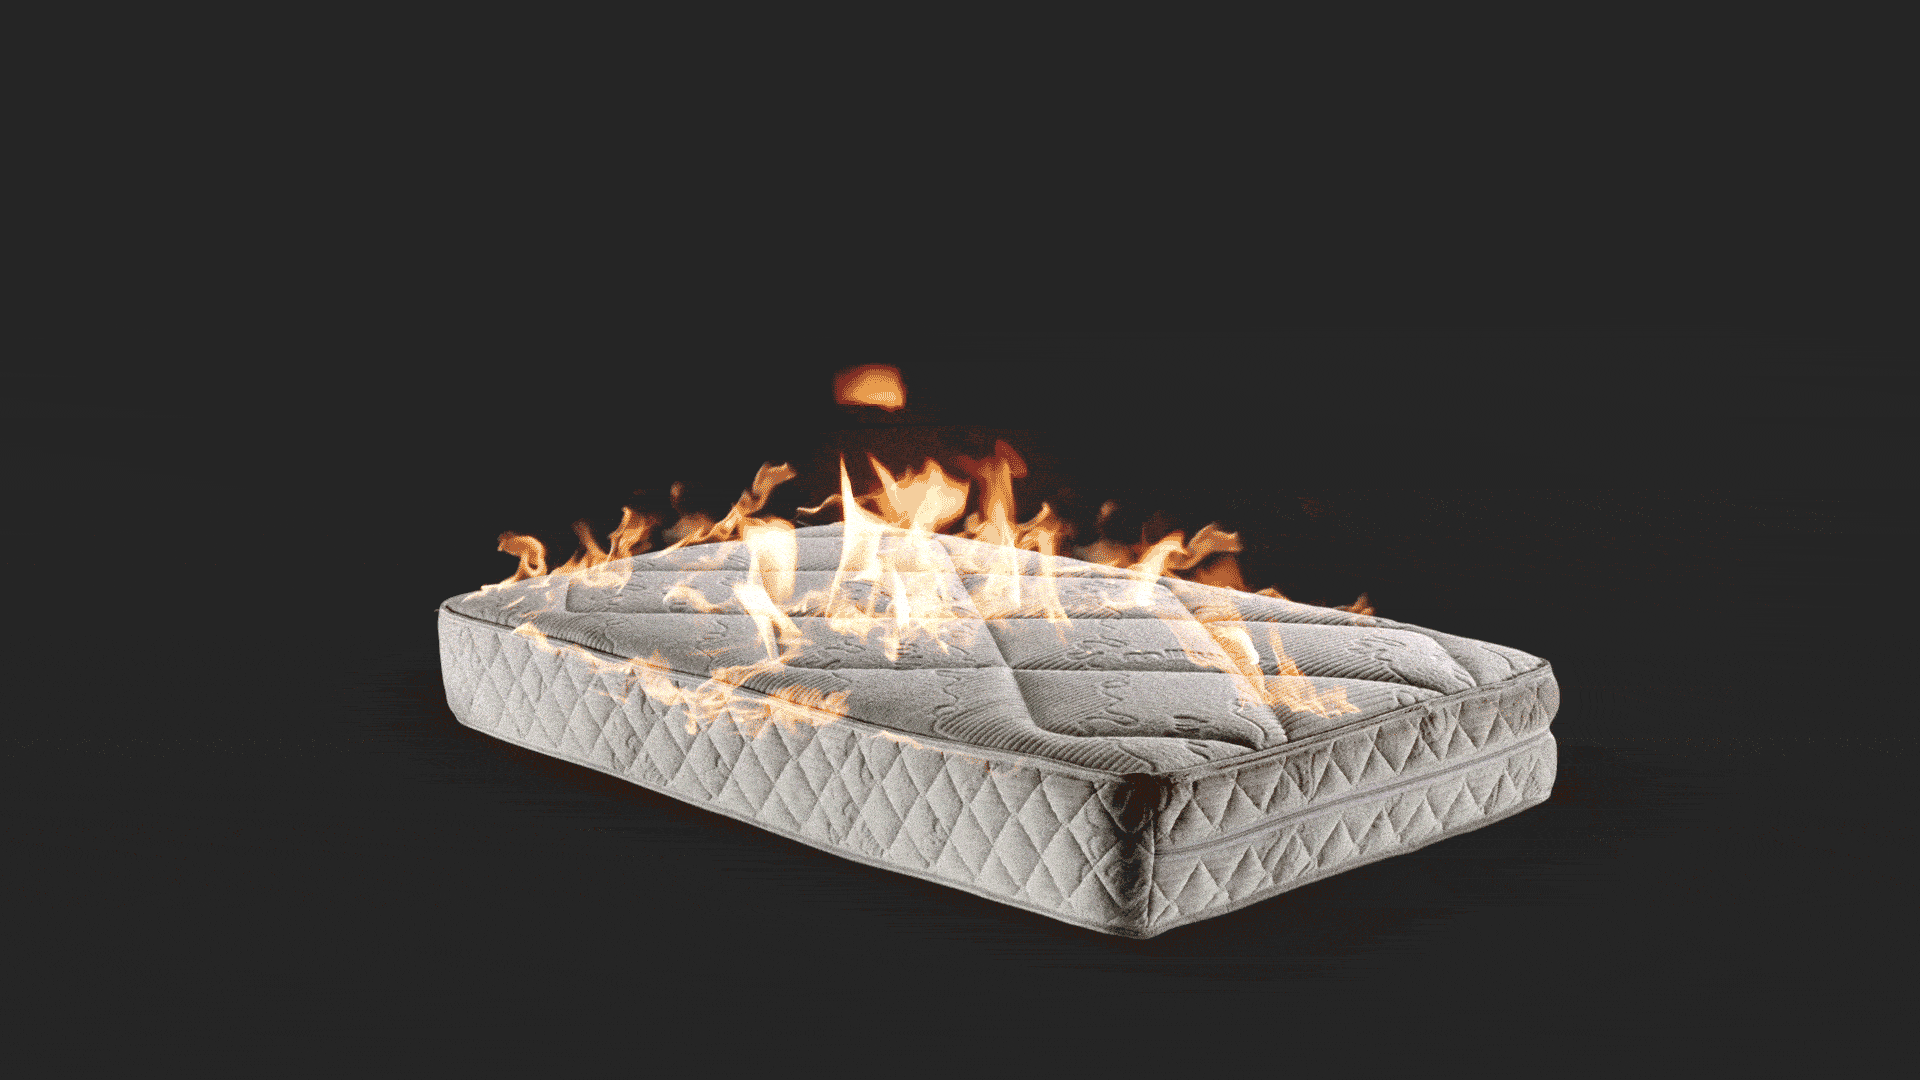 Animated illustration of a mattress on fire.